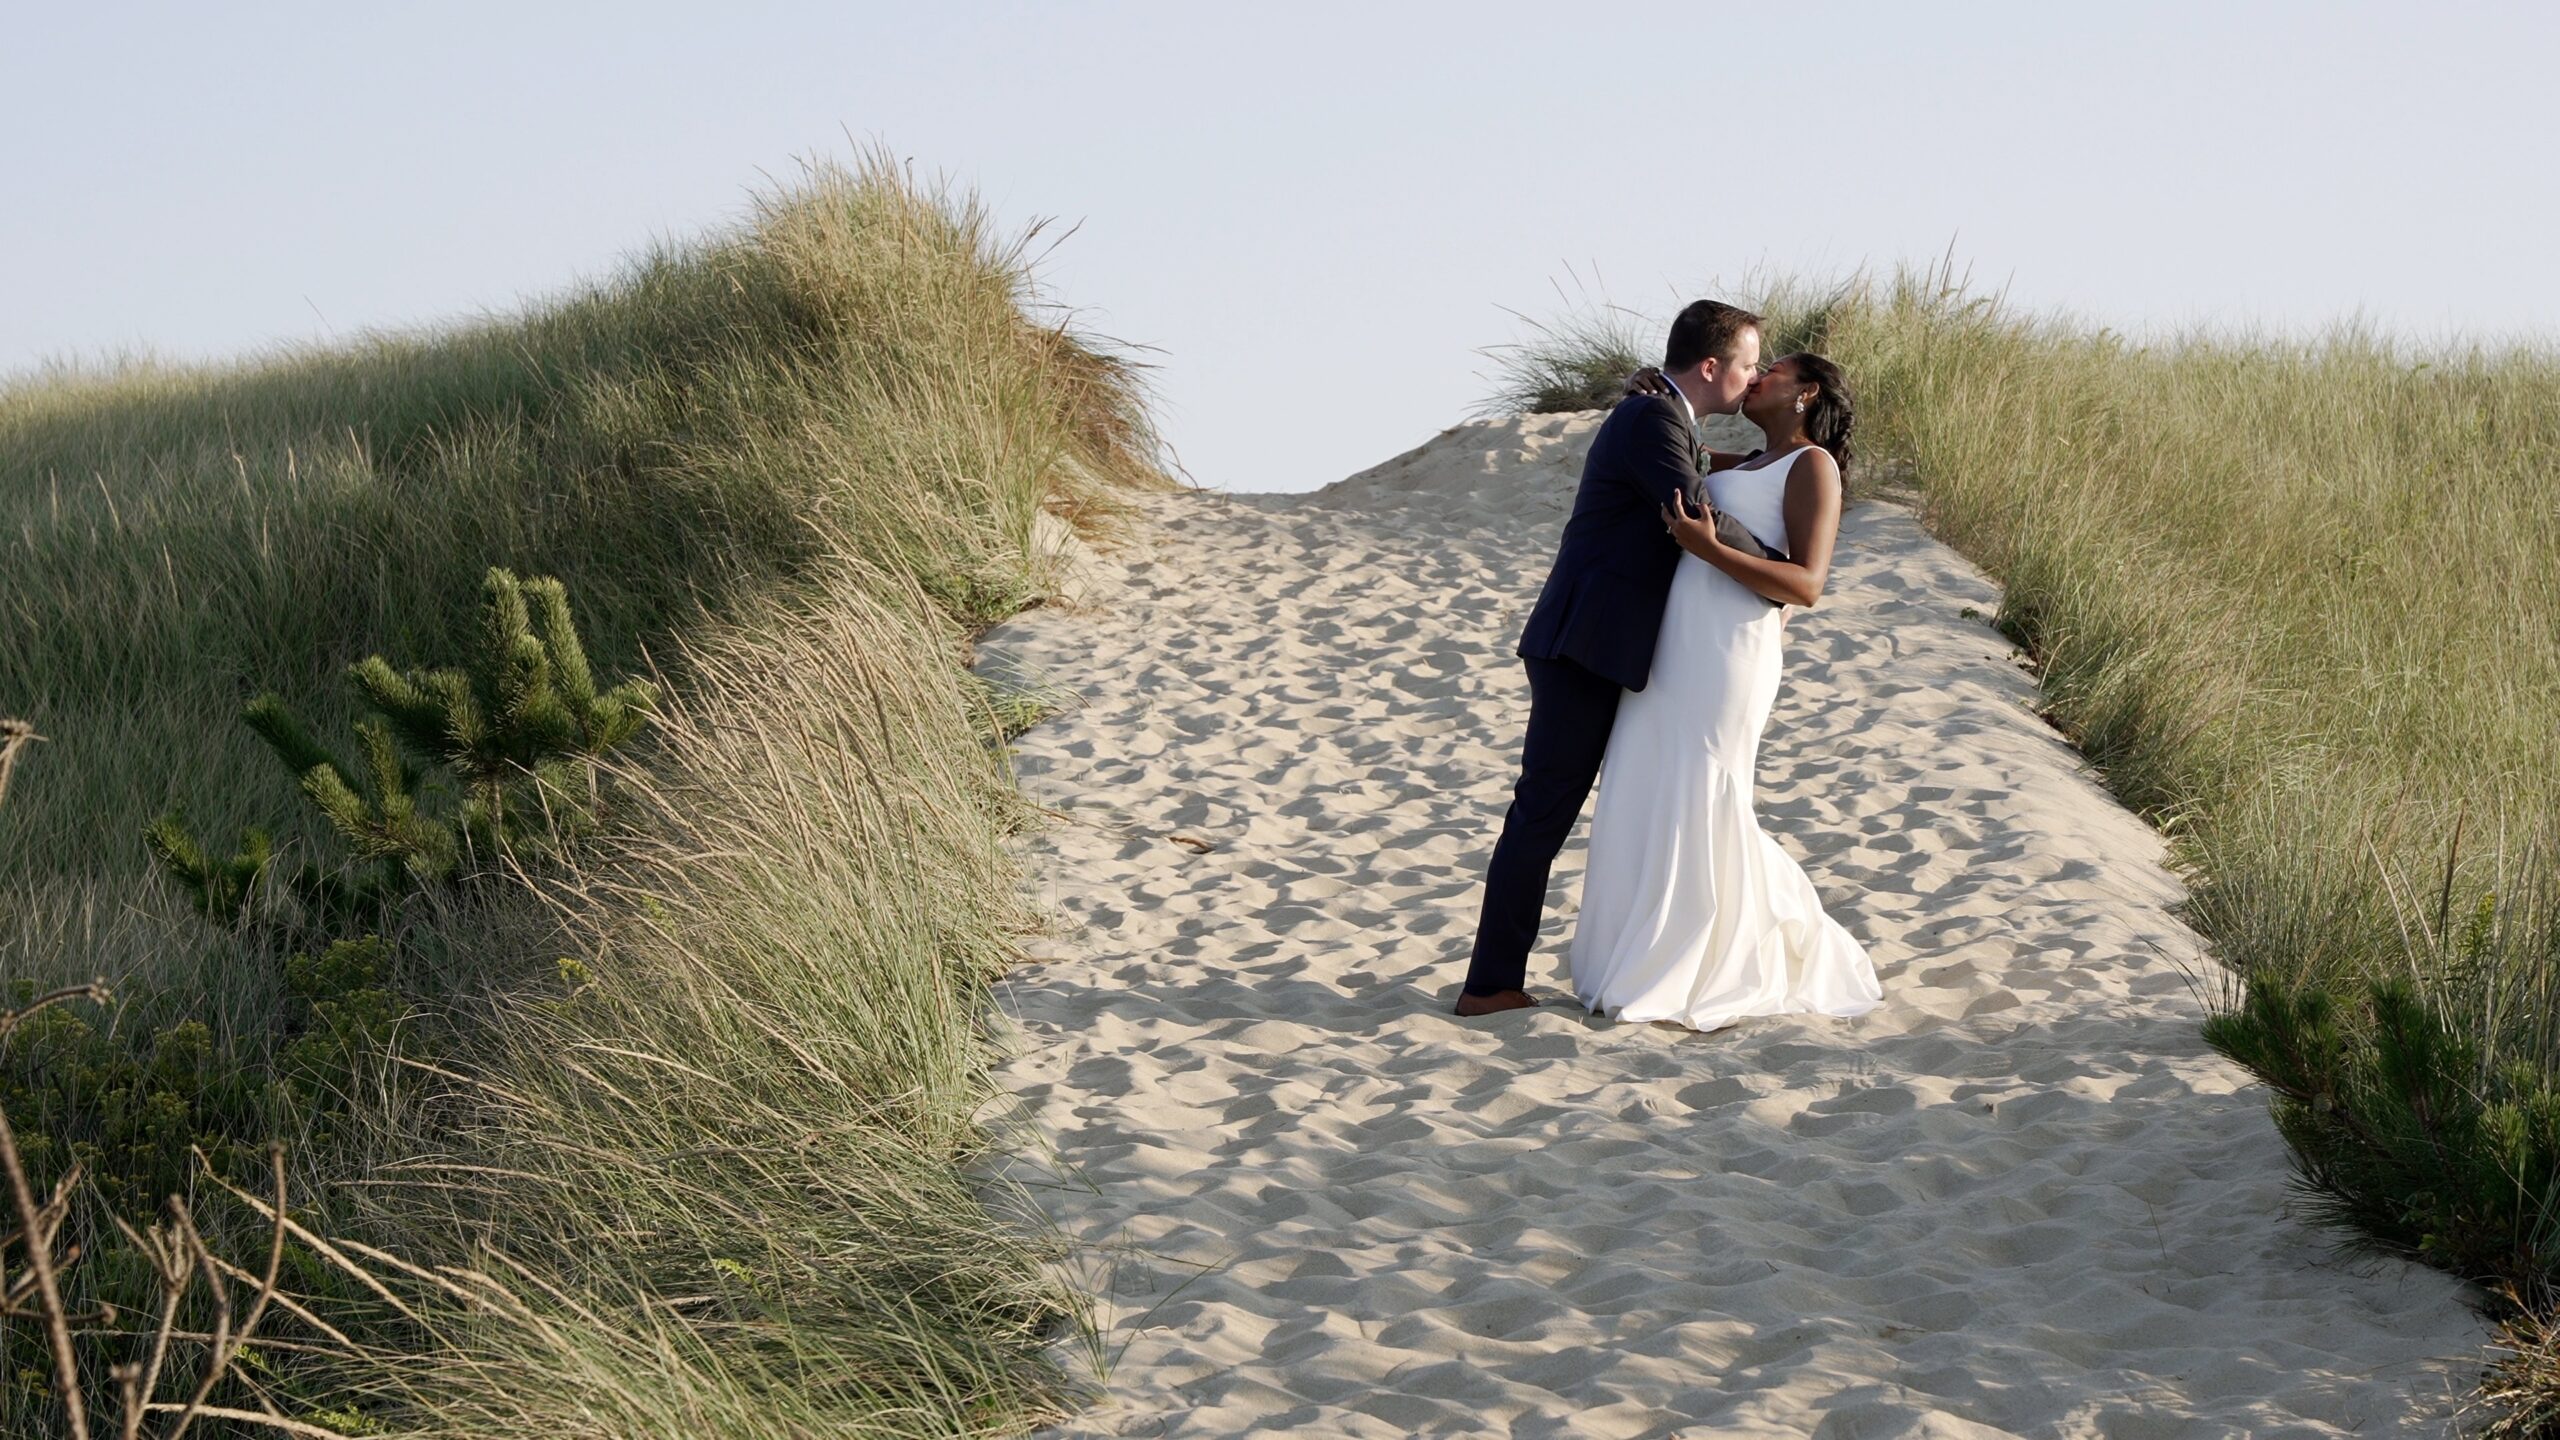 Couple standing in a sandy path with American Dune Grass on either side. The groom is gently dipping the bride while kissing